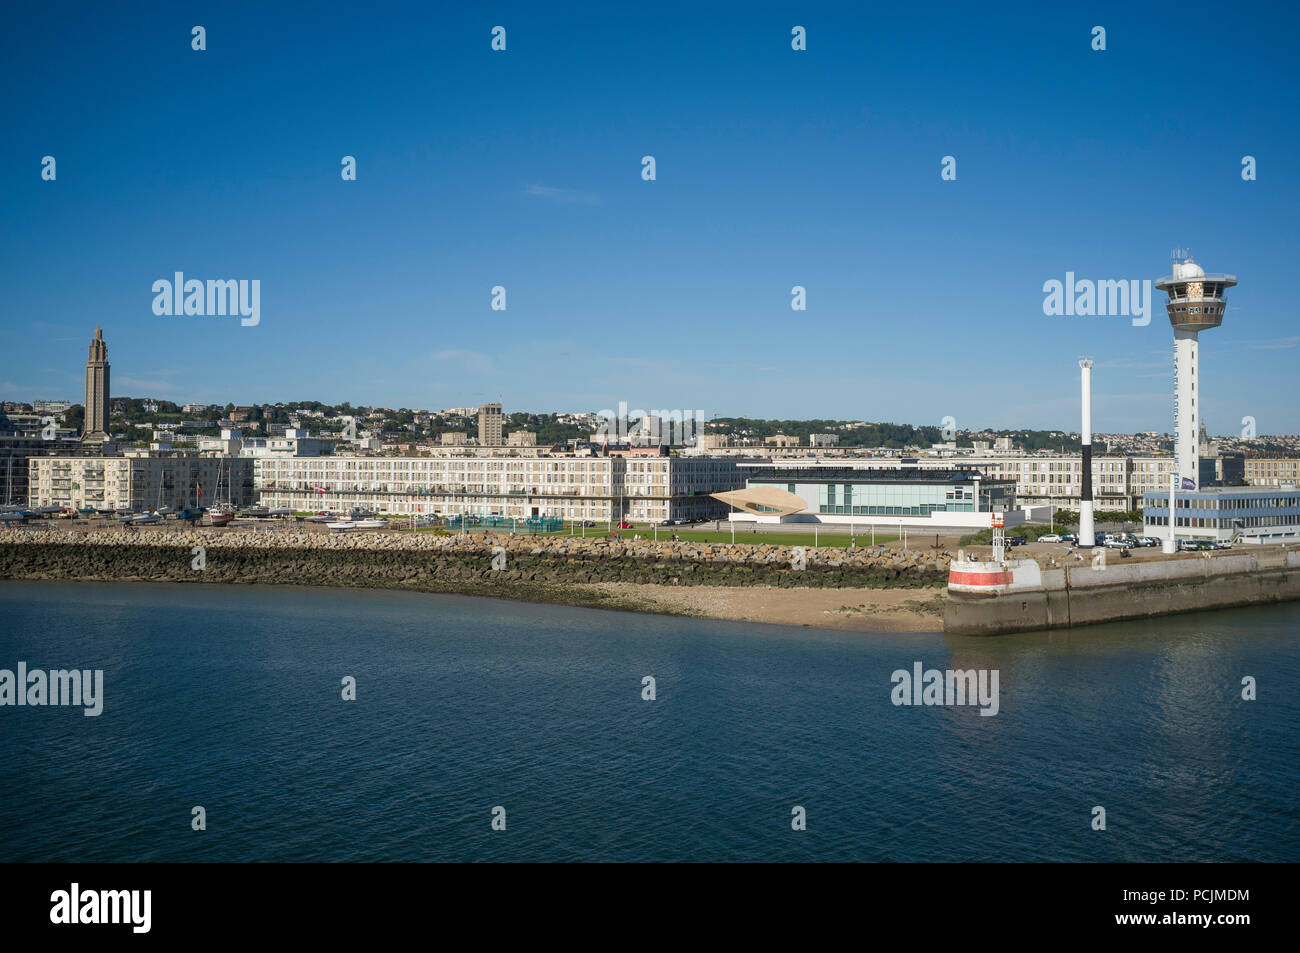 View of Le Havre from the sea showing the Musee Malraux and iconic apartments by Auguste Perret Stock Photo